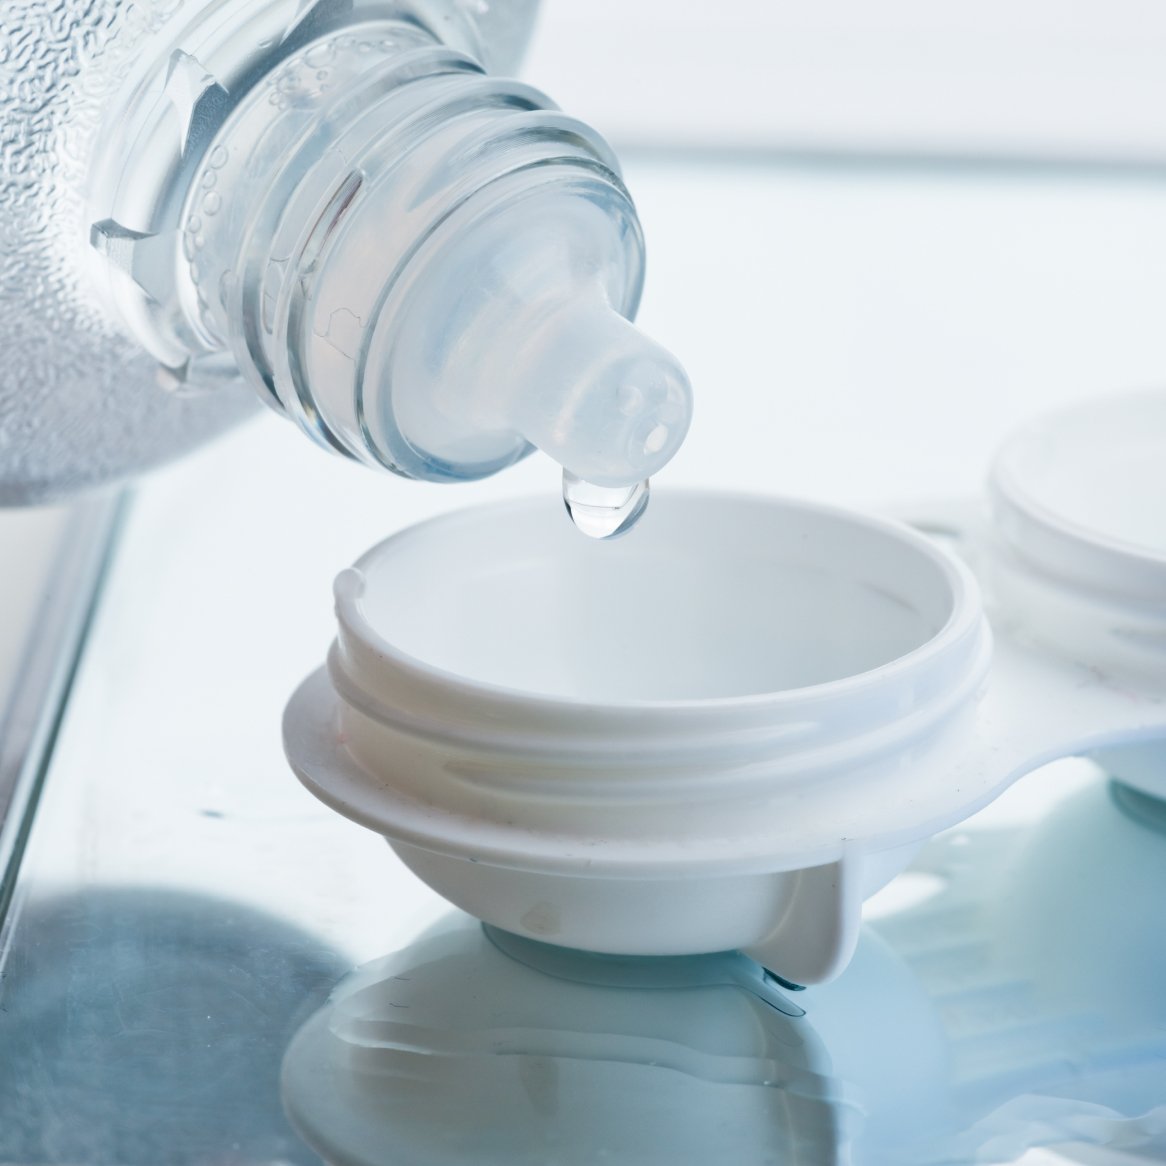 What Is Contact Solution?